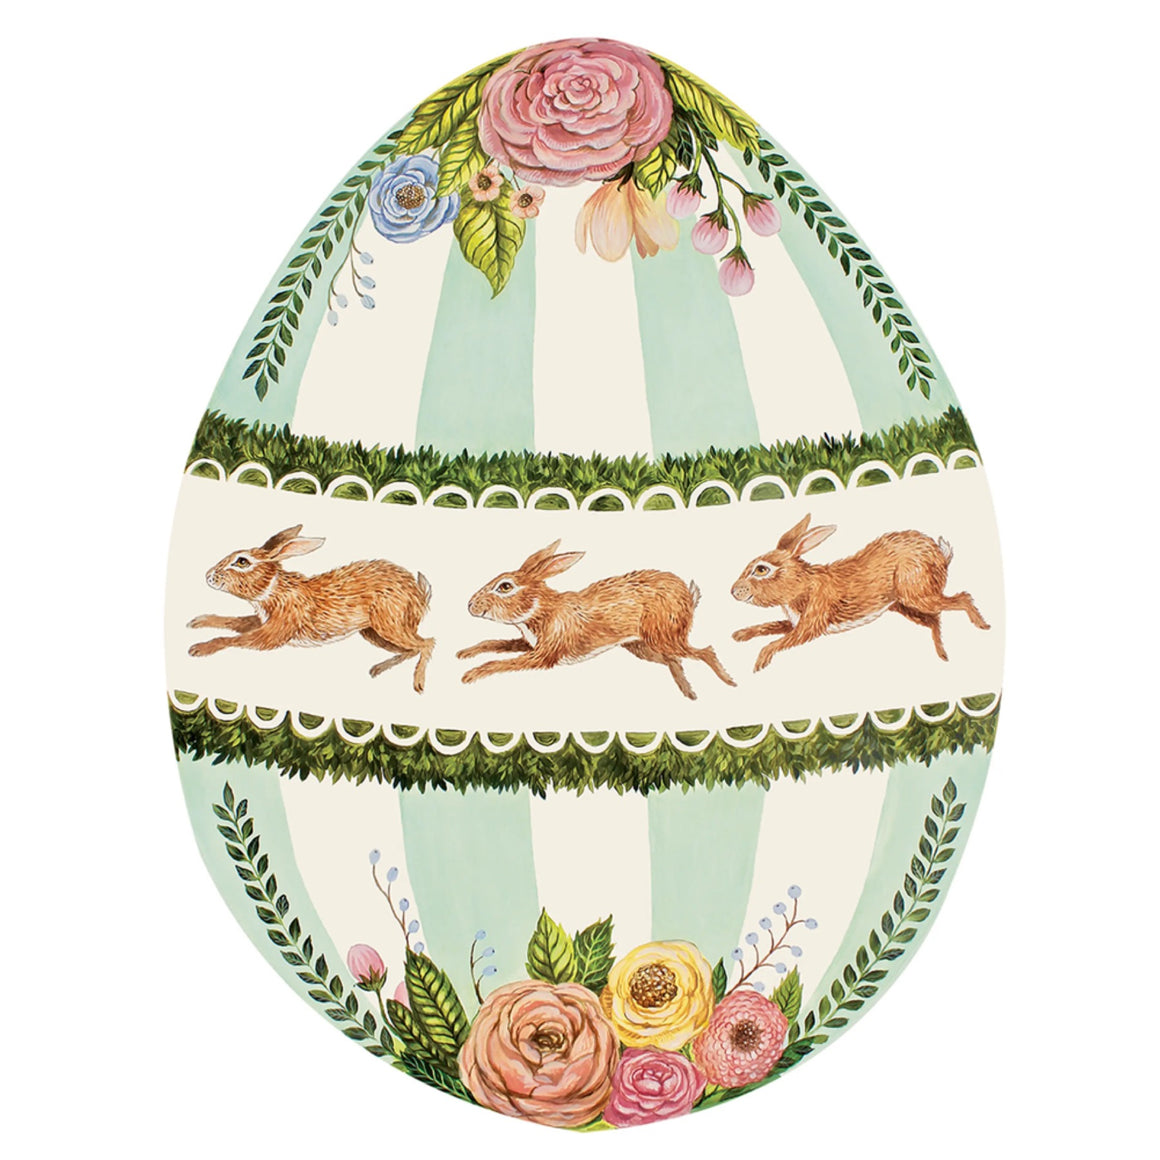 PLACEMATS - DIE-CUT BOXWOOD BUNNY EGG (Pack of 12)